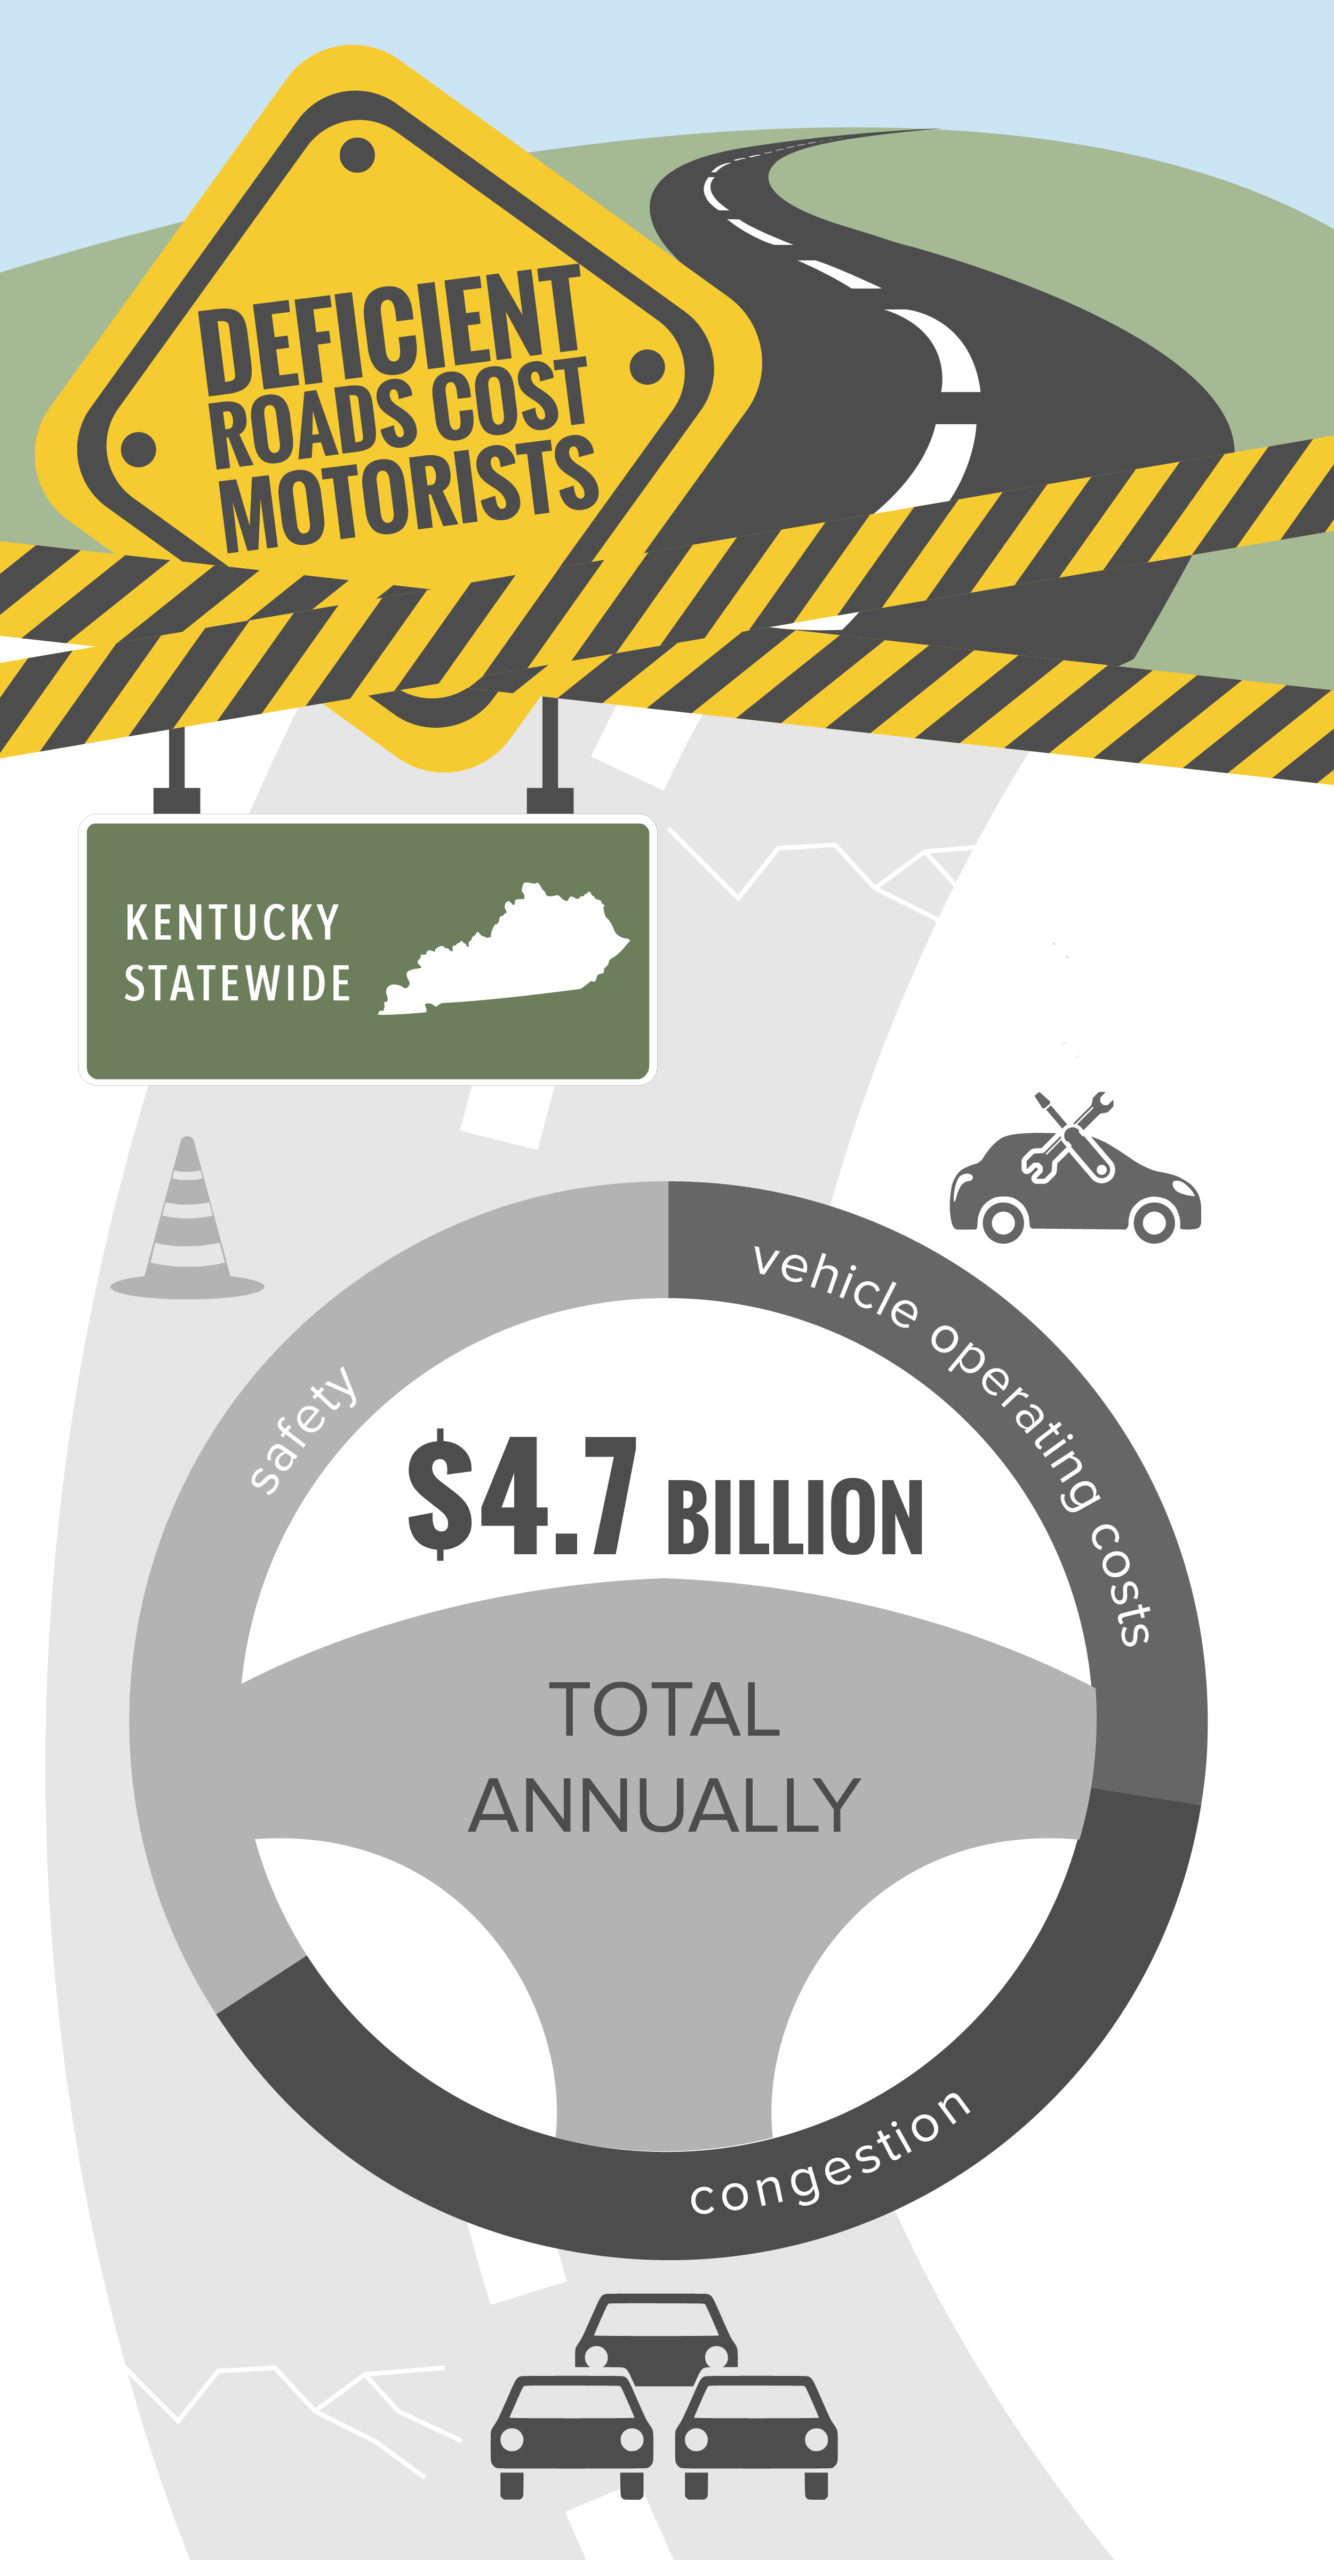 Kentucky Deficient Roads Cost to Motorists Infographic – February 2022